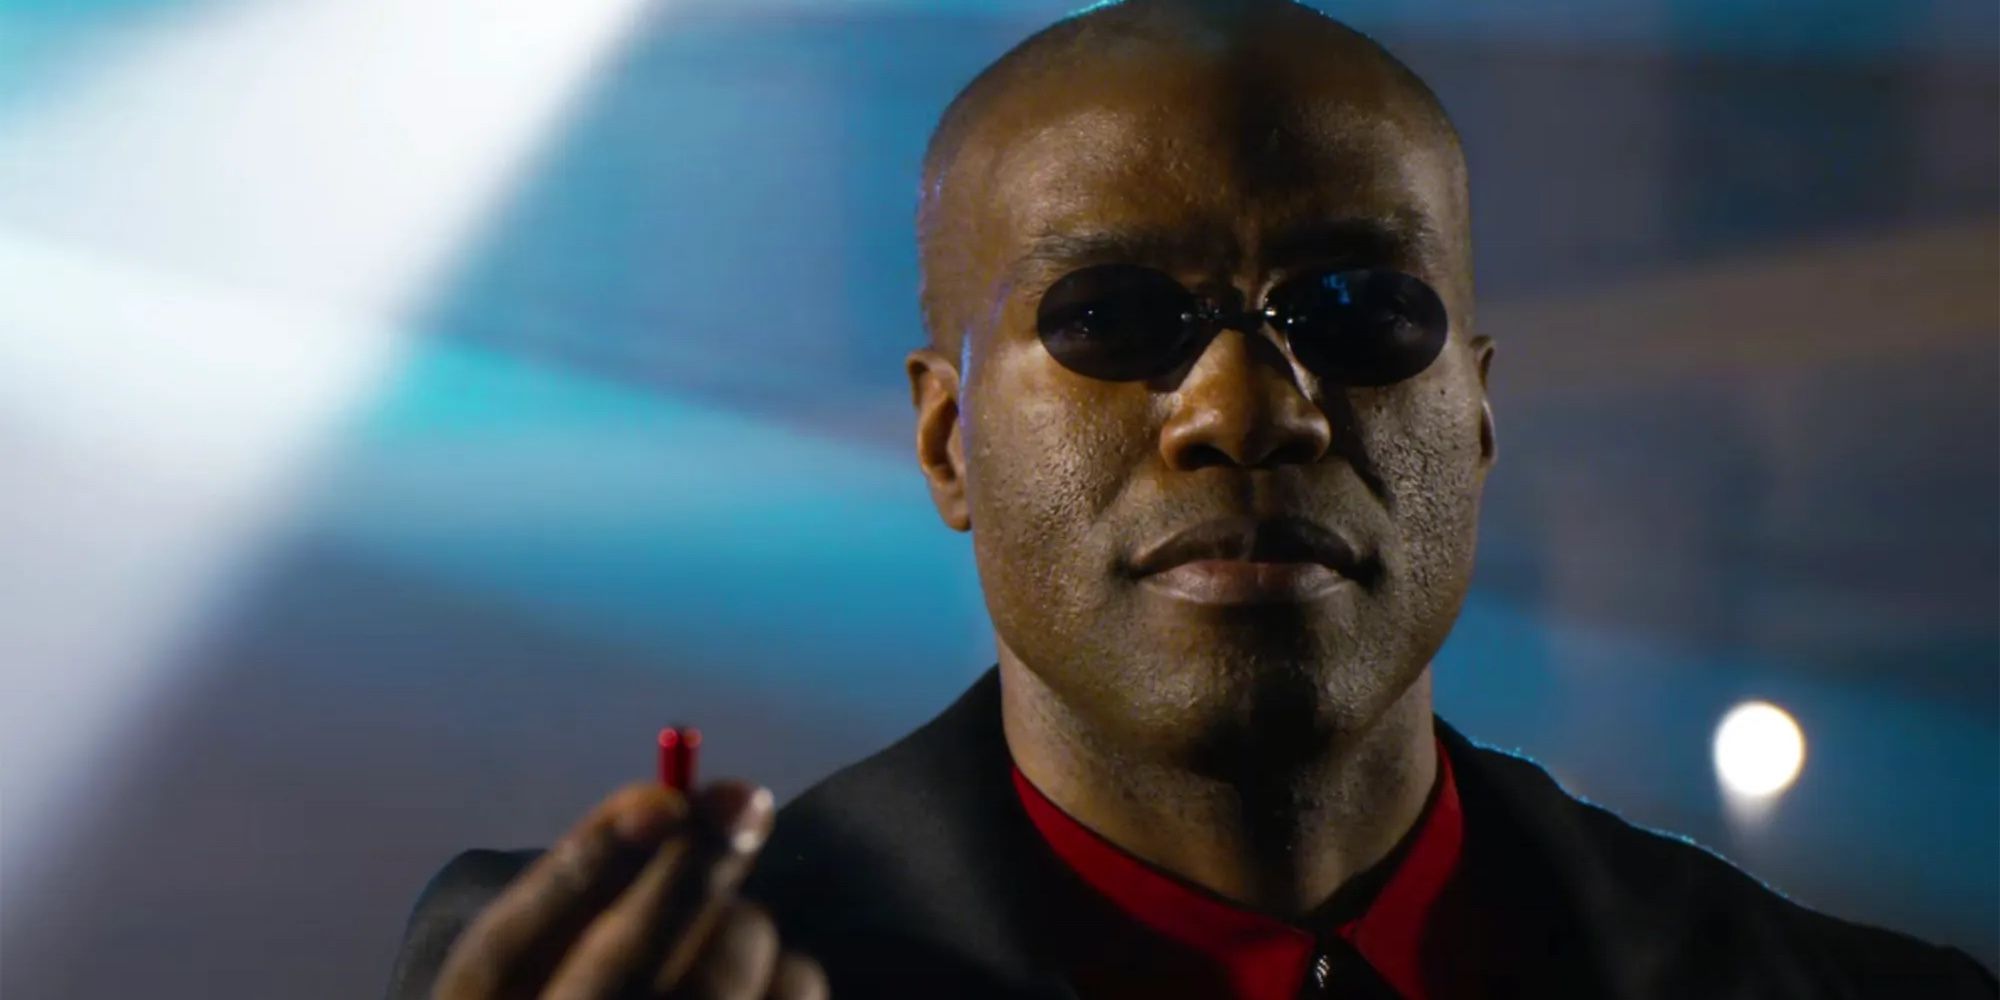 Morpheus holds up a red pill in The Matrix Resurrections